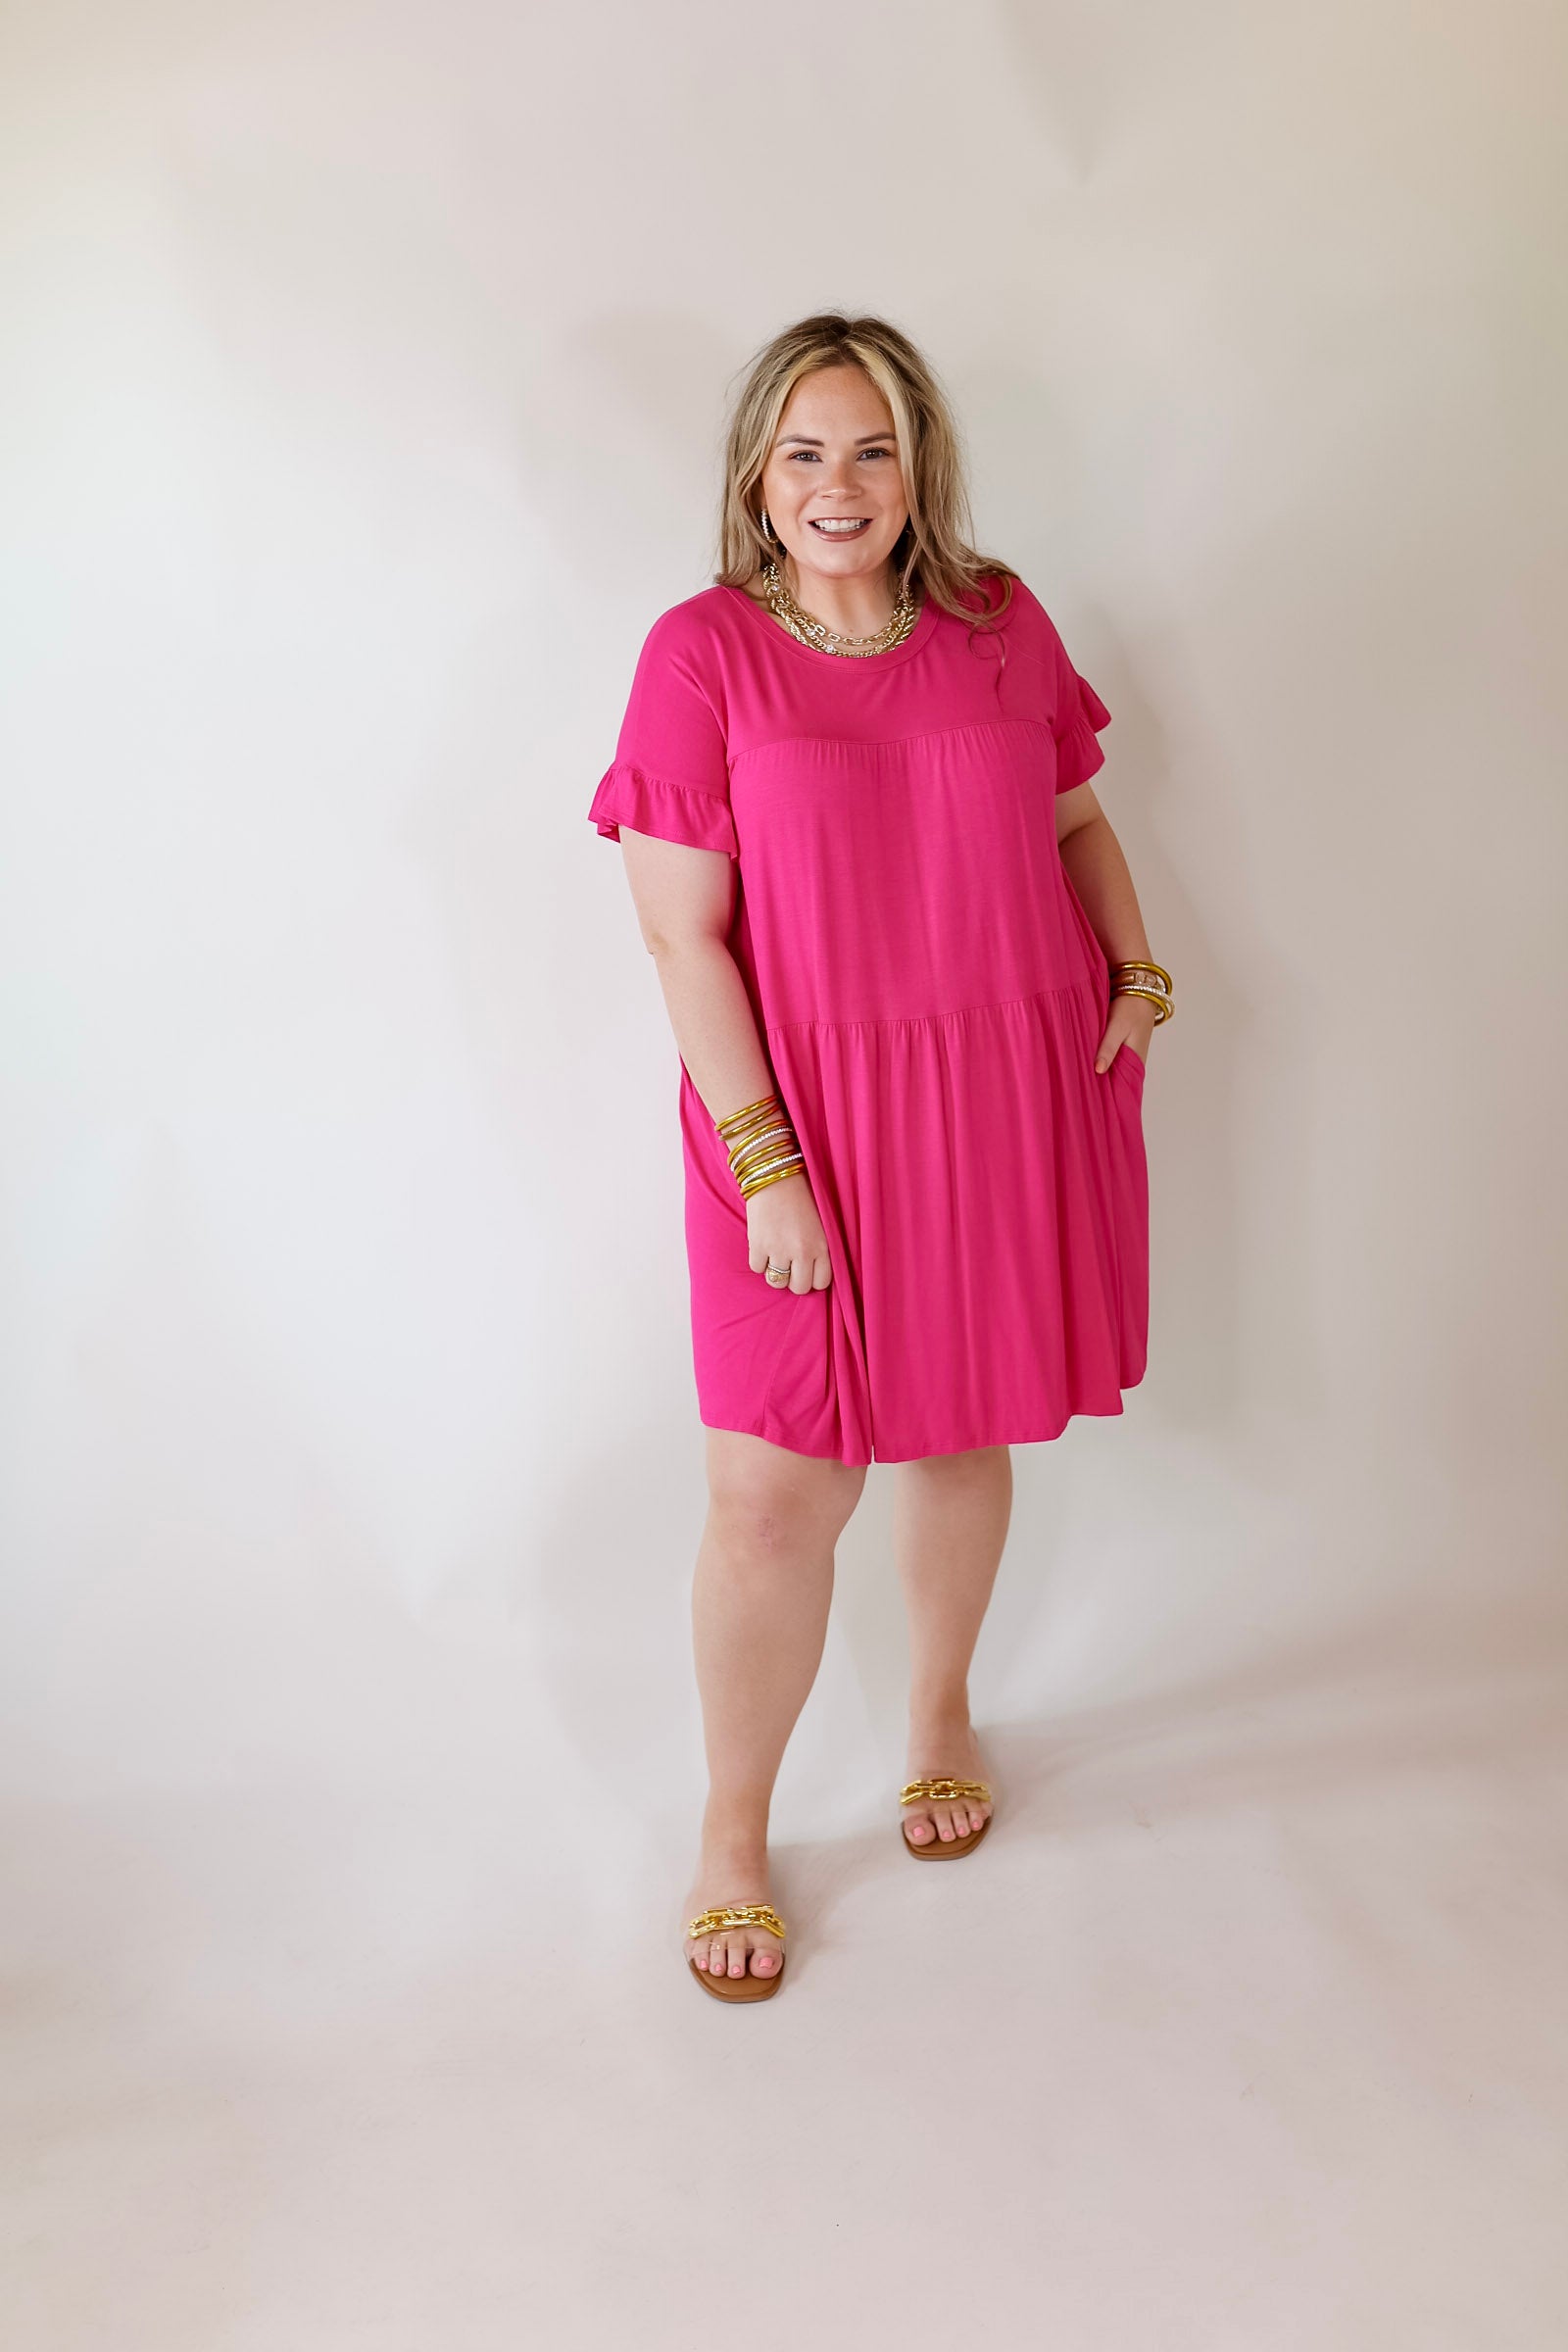 Gorgeous Girly Ruffle Sleeve Tiered Dress in Fuchsia Pink - Giddy Up Glamour Boutique